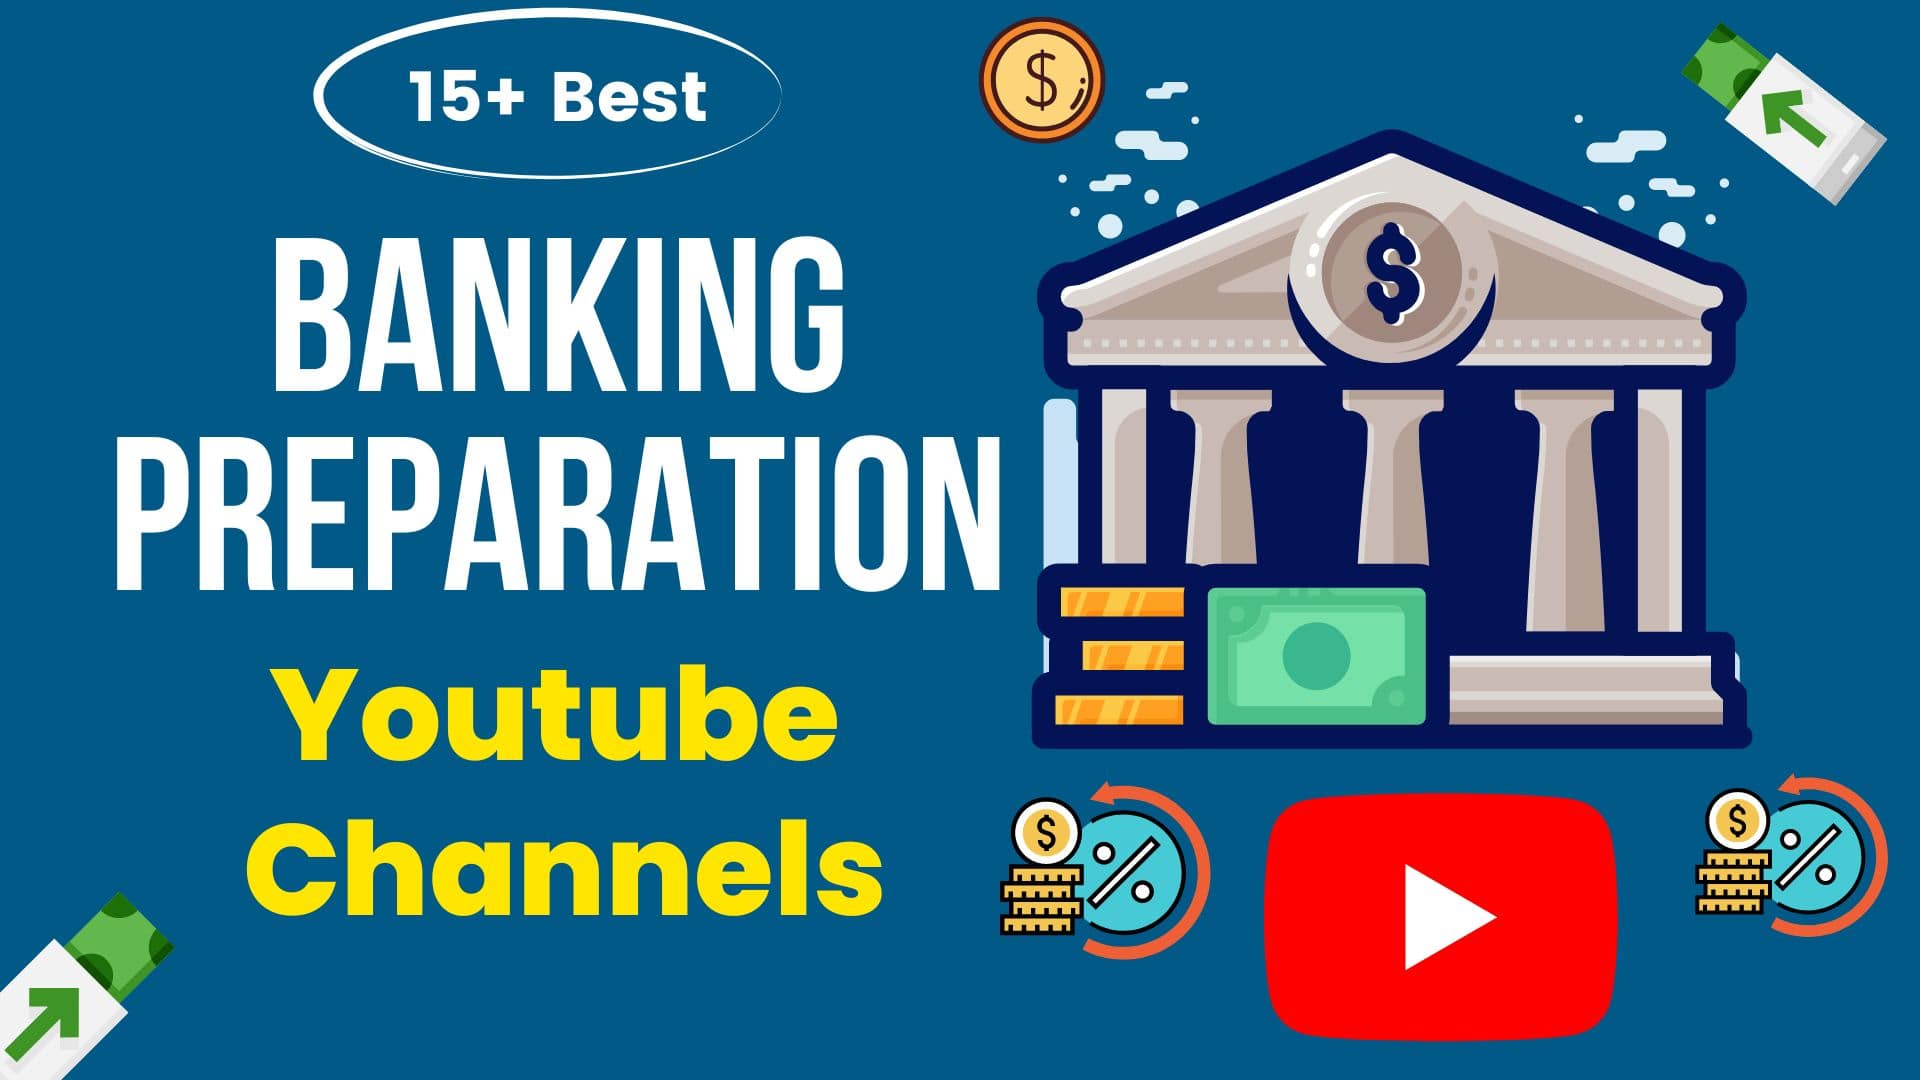 youtube-channels-for-banking-preparation